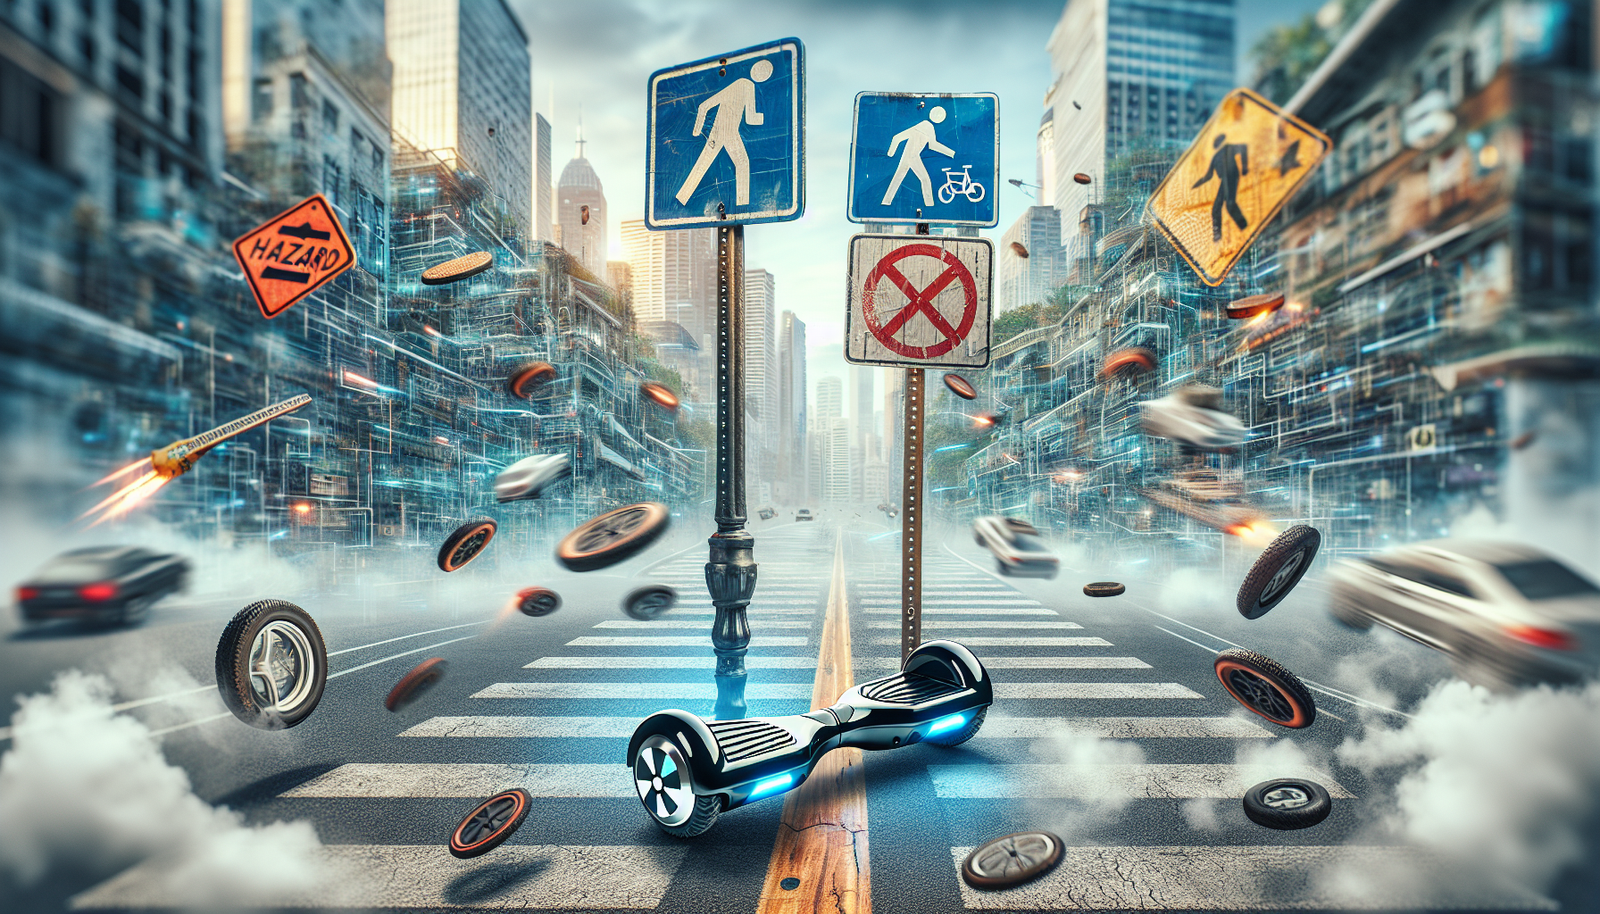 What Is The Impact Of Hoverboards On Pedestrian Safety?